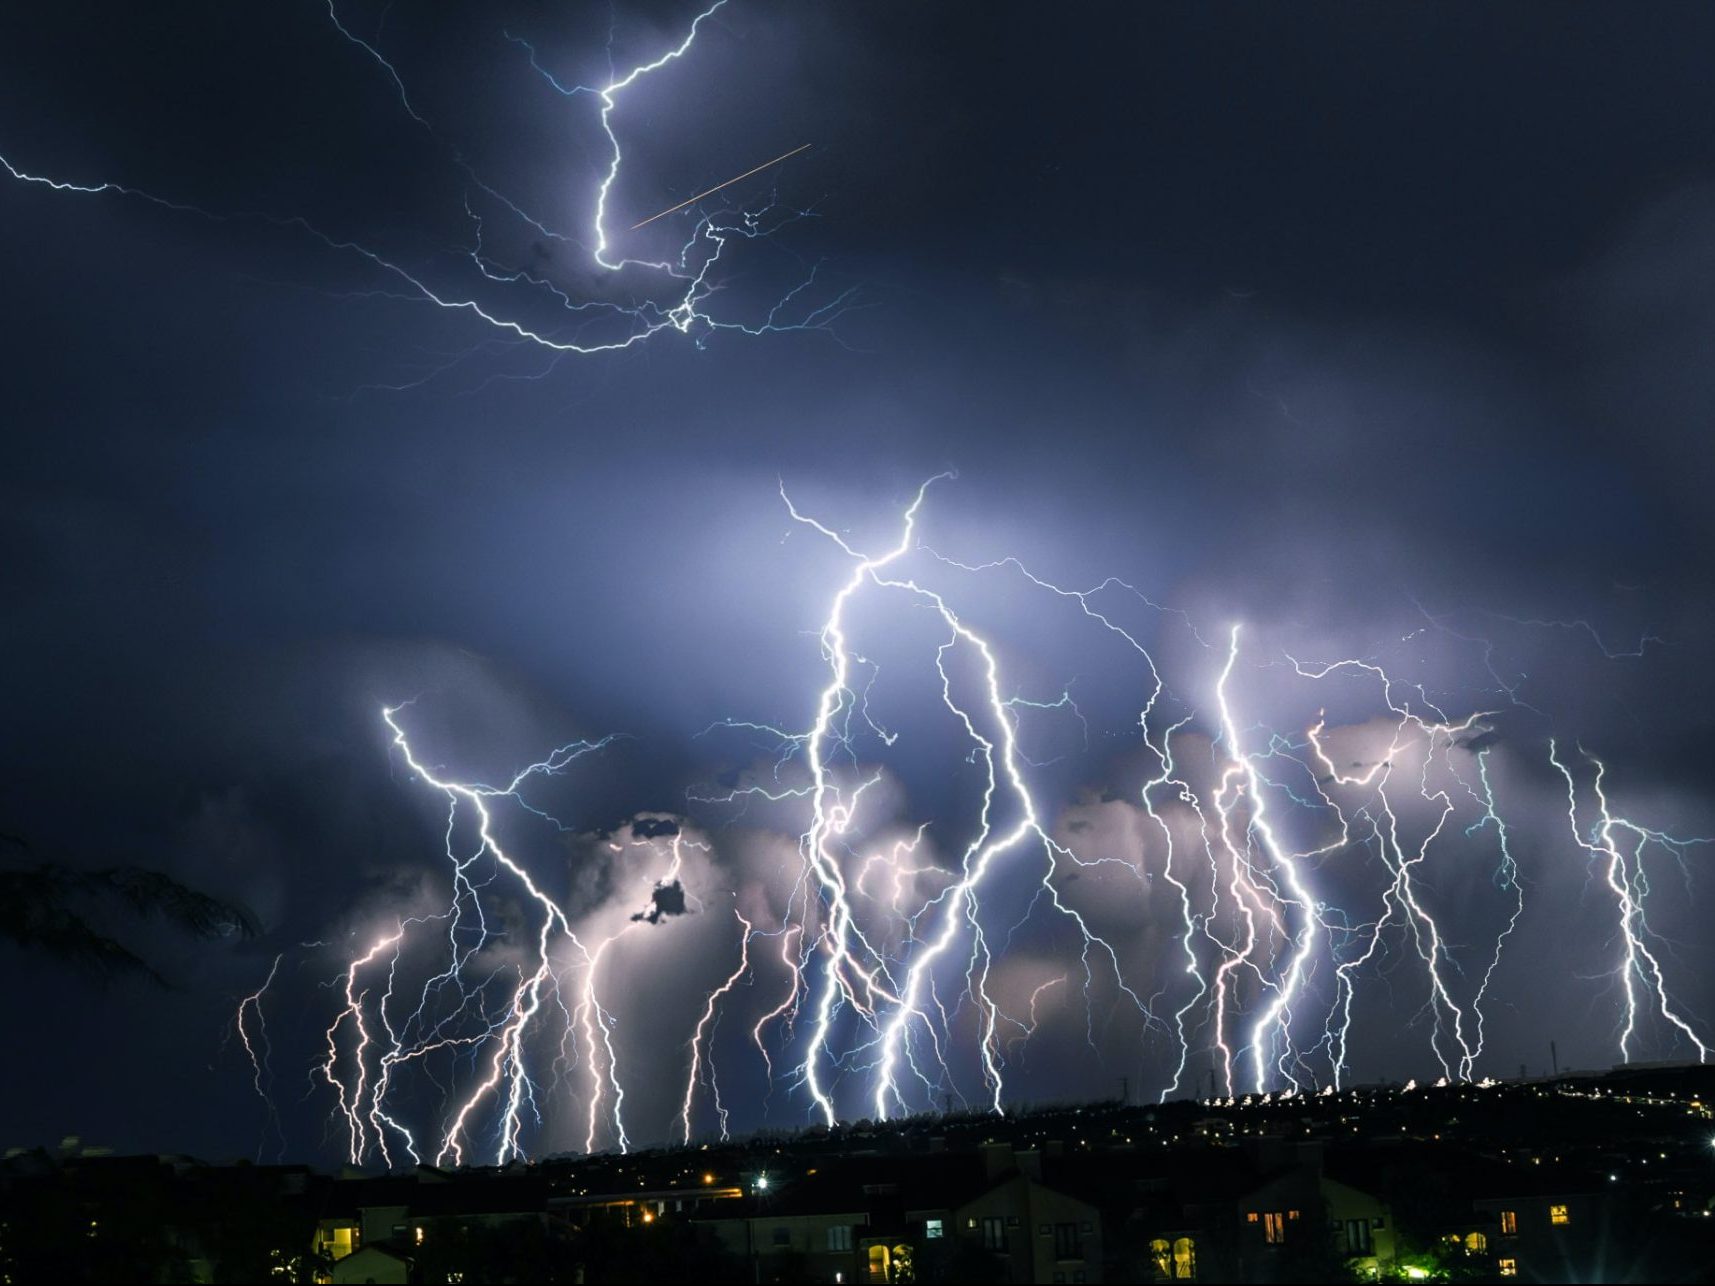 an article on natural disasters has a picture of lightning striking at night